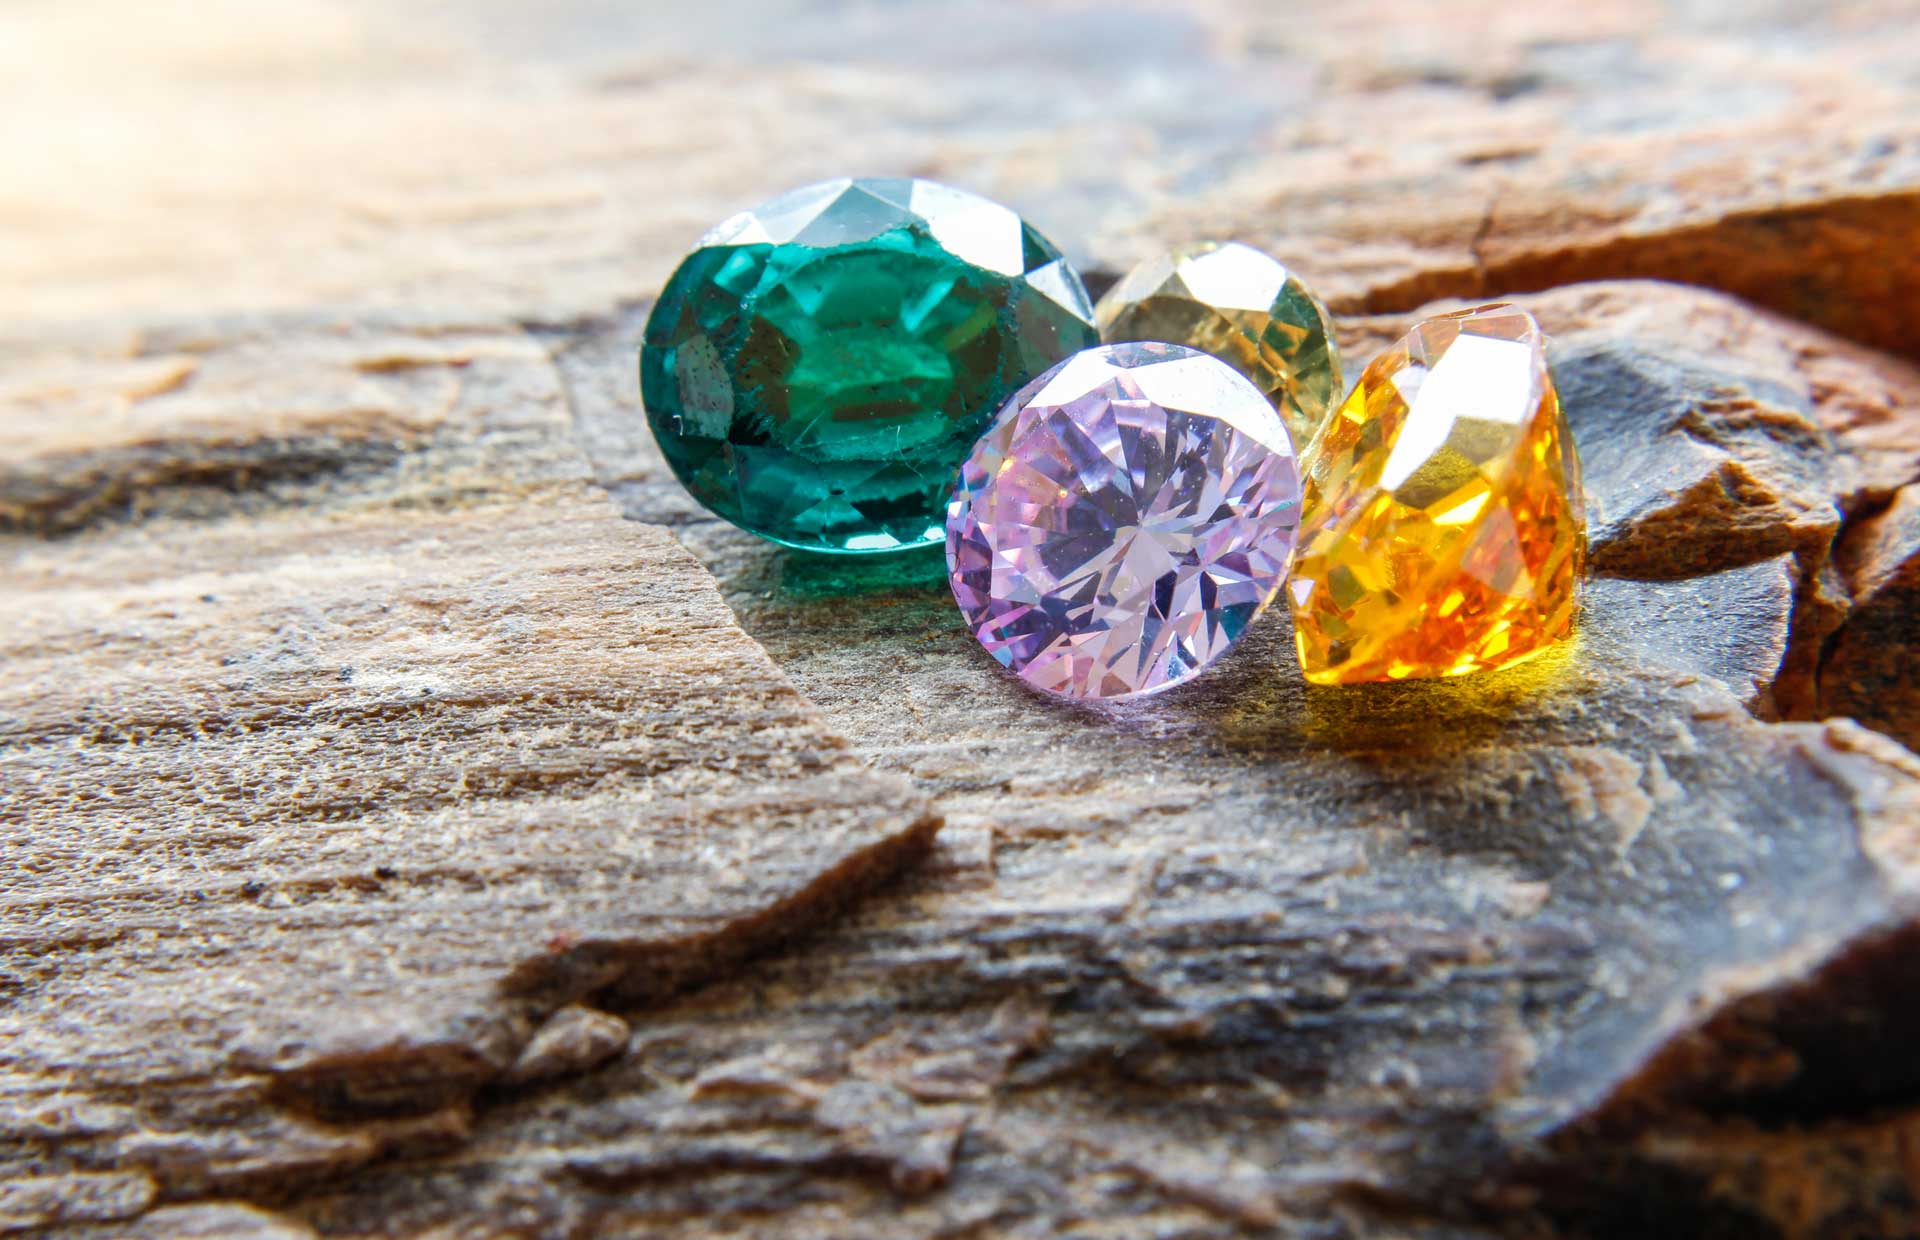 The Best Gemstones to Collect in 2022